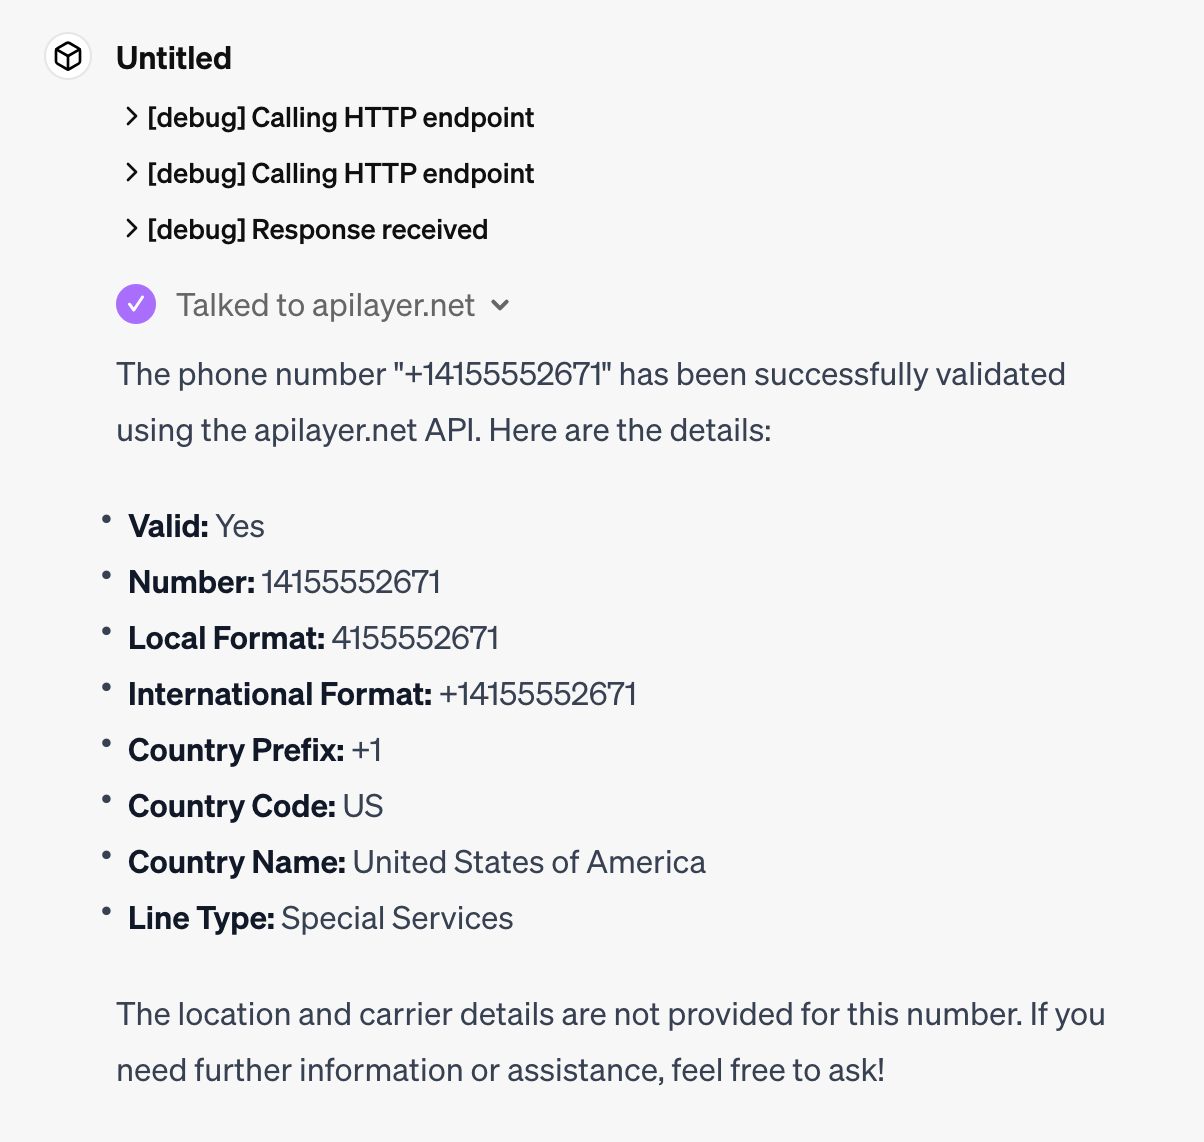 ChatGPT returns the verification details for the test phone number in the API url